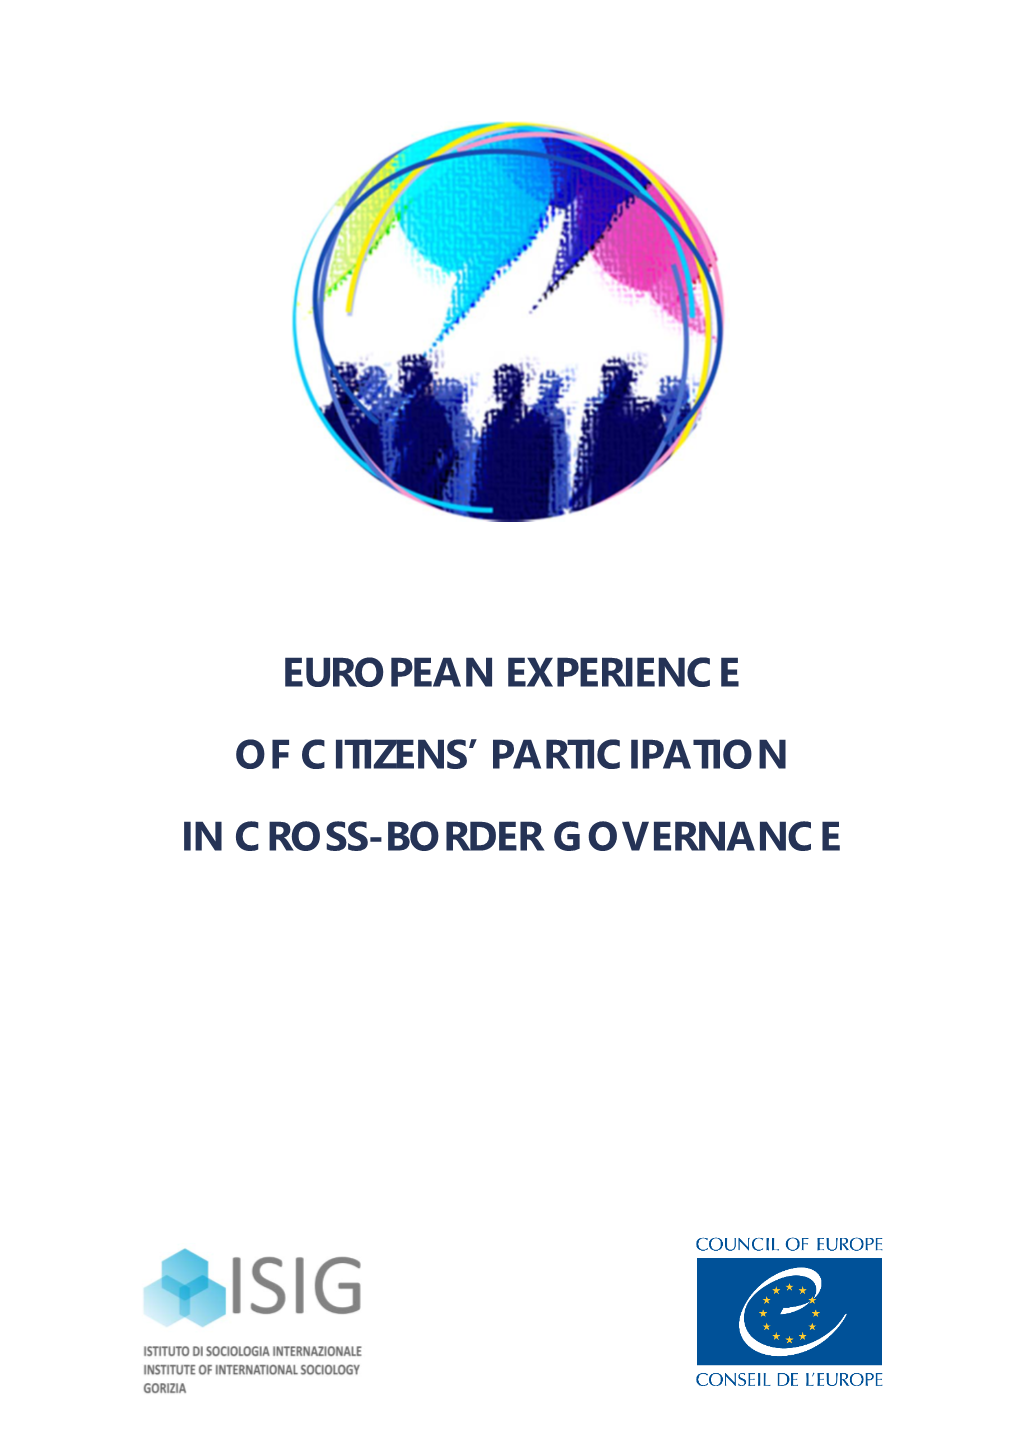 European Experience of Citizens' Participation in Cross-Border